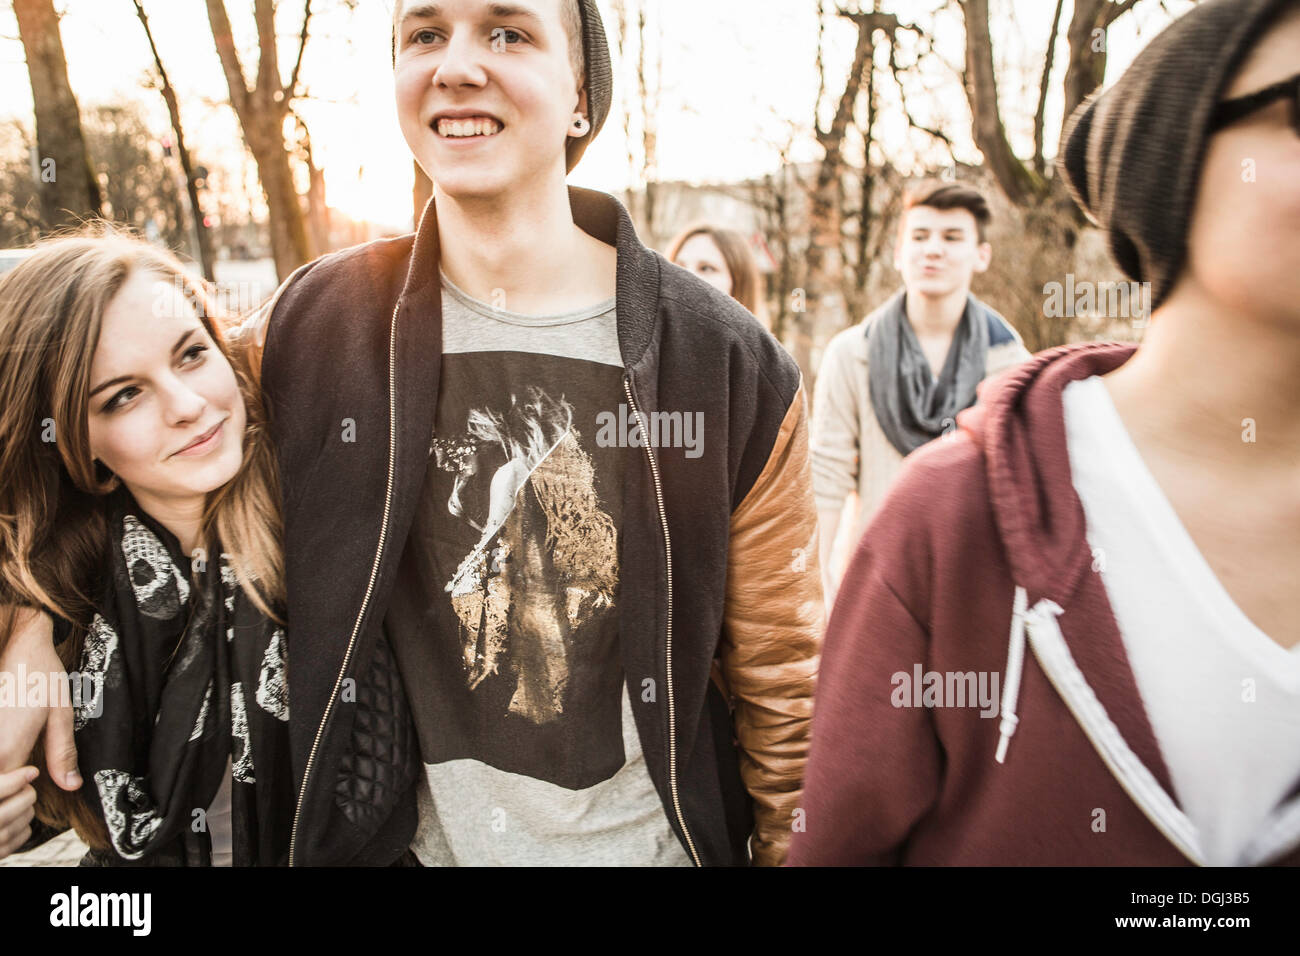 Five teenagers walking together Stock Photo